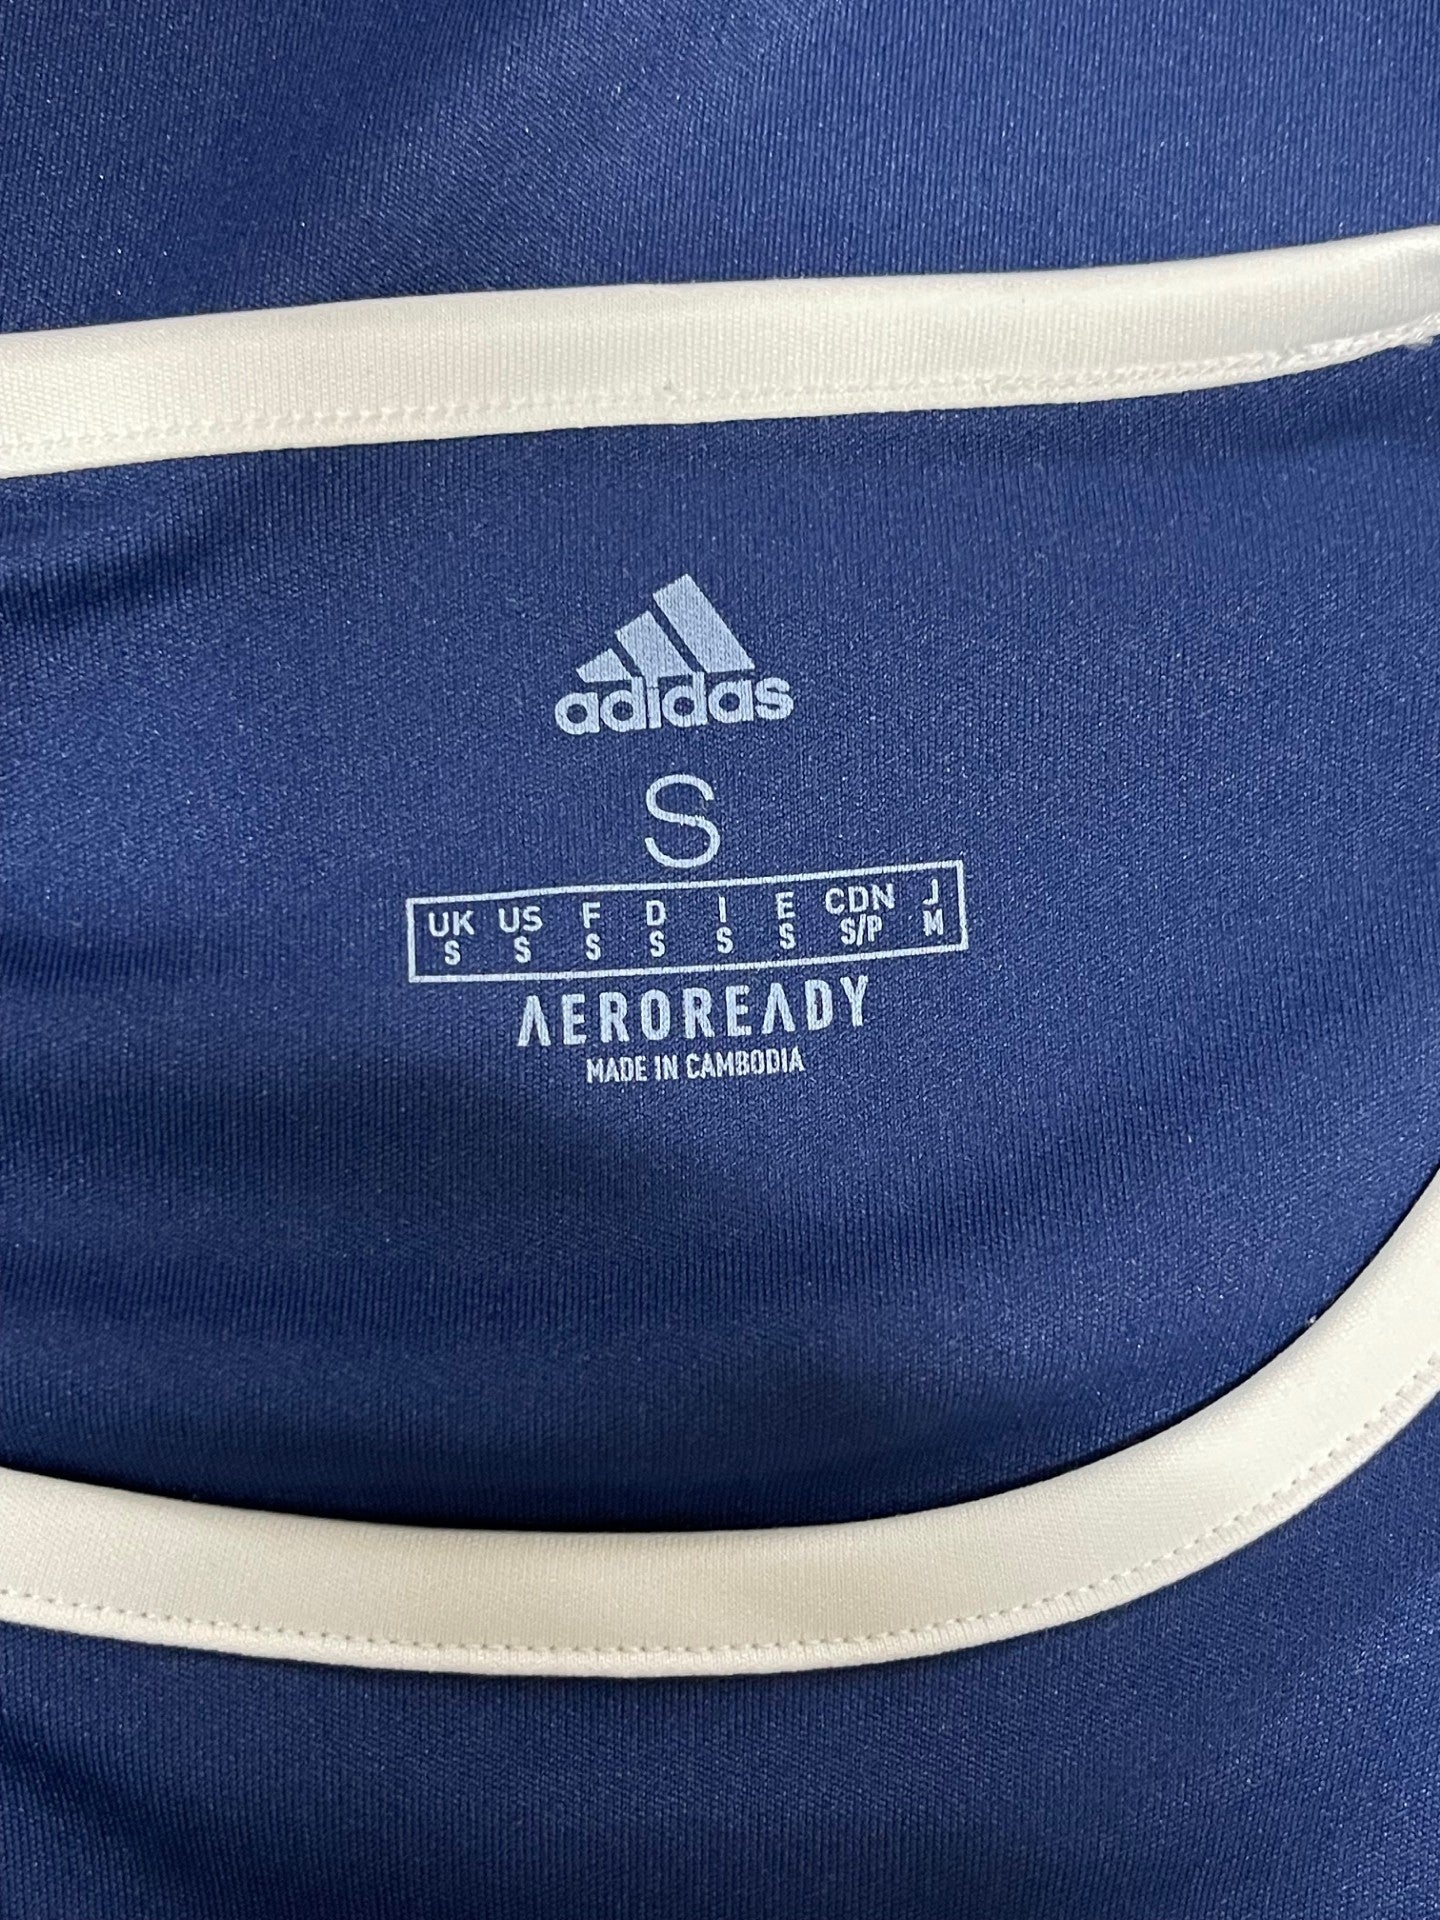 Adidas Blue and White Top Small